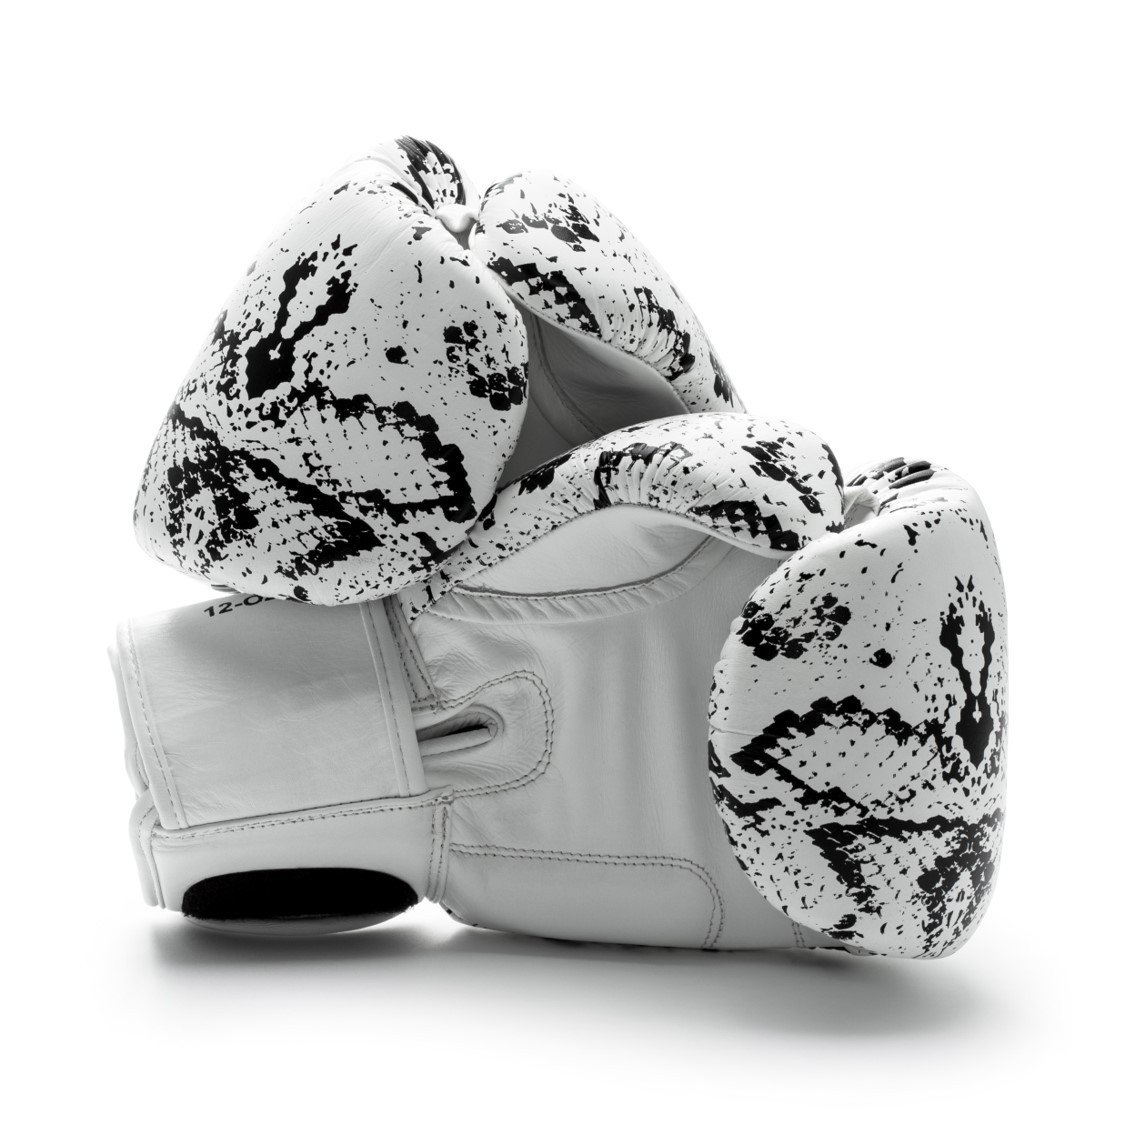 Cult athleisure brands we want to shop right now: UNIT NINE white python boxing gloves, $125.00 AUD (approx. $140 NZD) These 12oz gloves are made of 100% real cow hide leather and have a large velcro wrist closure for a secure fit.